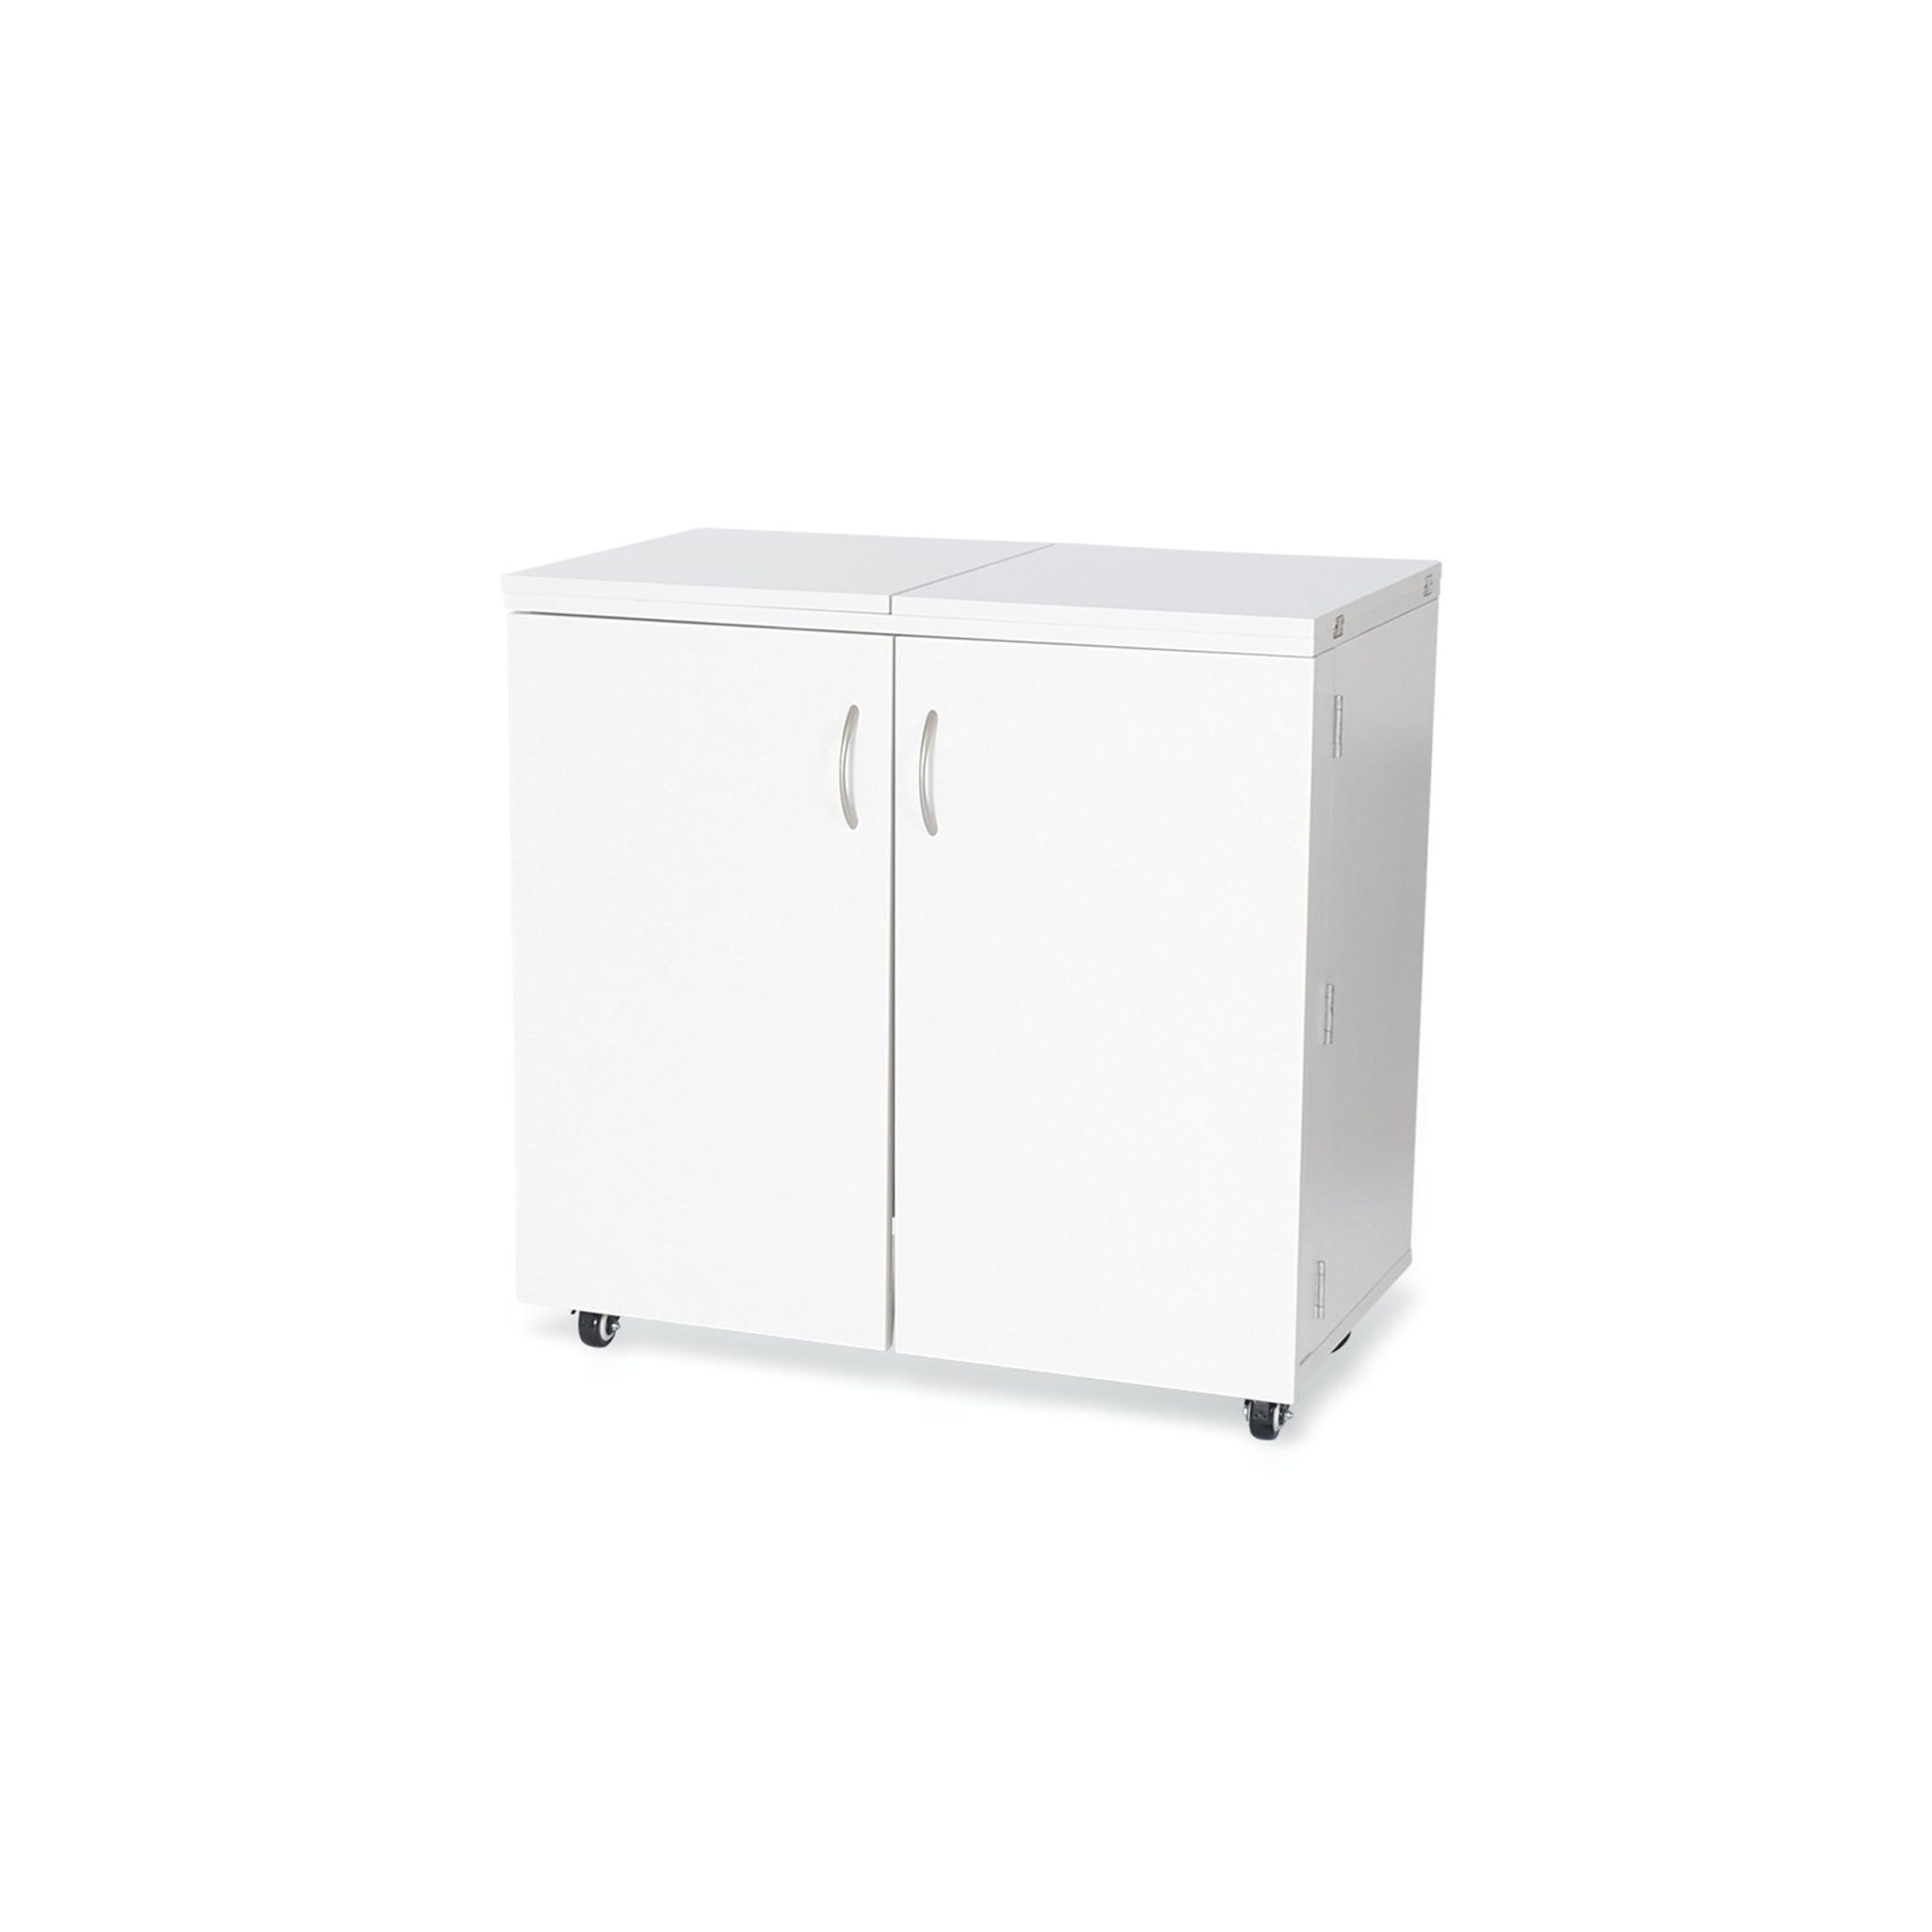 Bandicoot Sewing Cabinet has home-friendly collapsible footprint! Bandicoot features a dual shelving unit, 10 thread spool holders per door, and spacious door cubbies to store sewing notions, scissors and fabric swatches! Shop at Arrow Sewing.